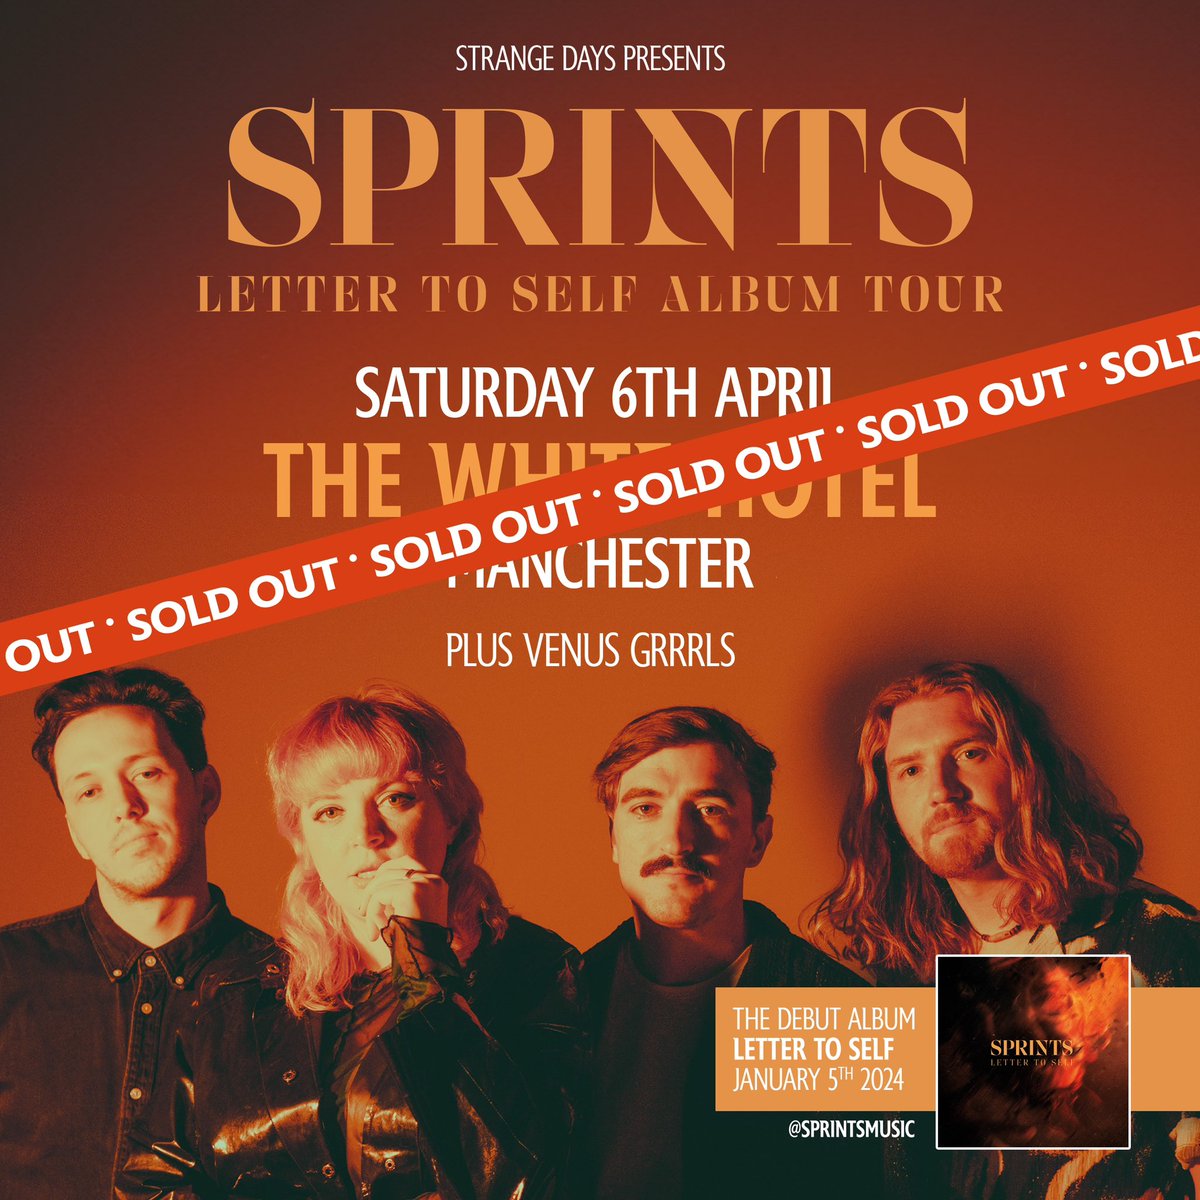 We can’t wait for @SPRINTSmusic to perform an intimate show at @M3_7LW next month. Missed out on tickets? They’re returning to Manchester Friday 29th Nov for their biggest Manchester headline to date at @NCHMCR this show will sell out